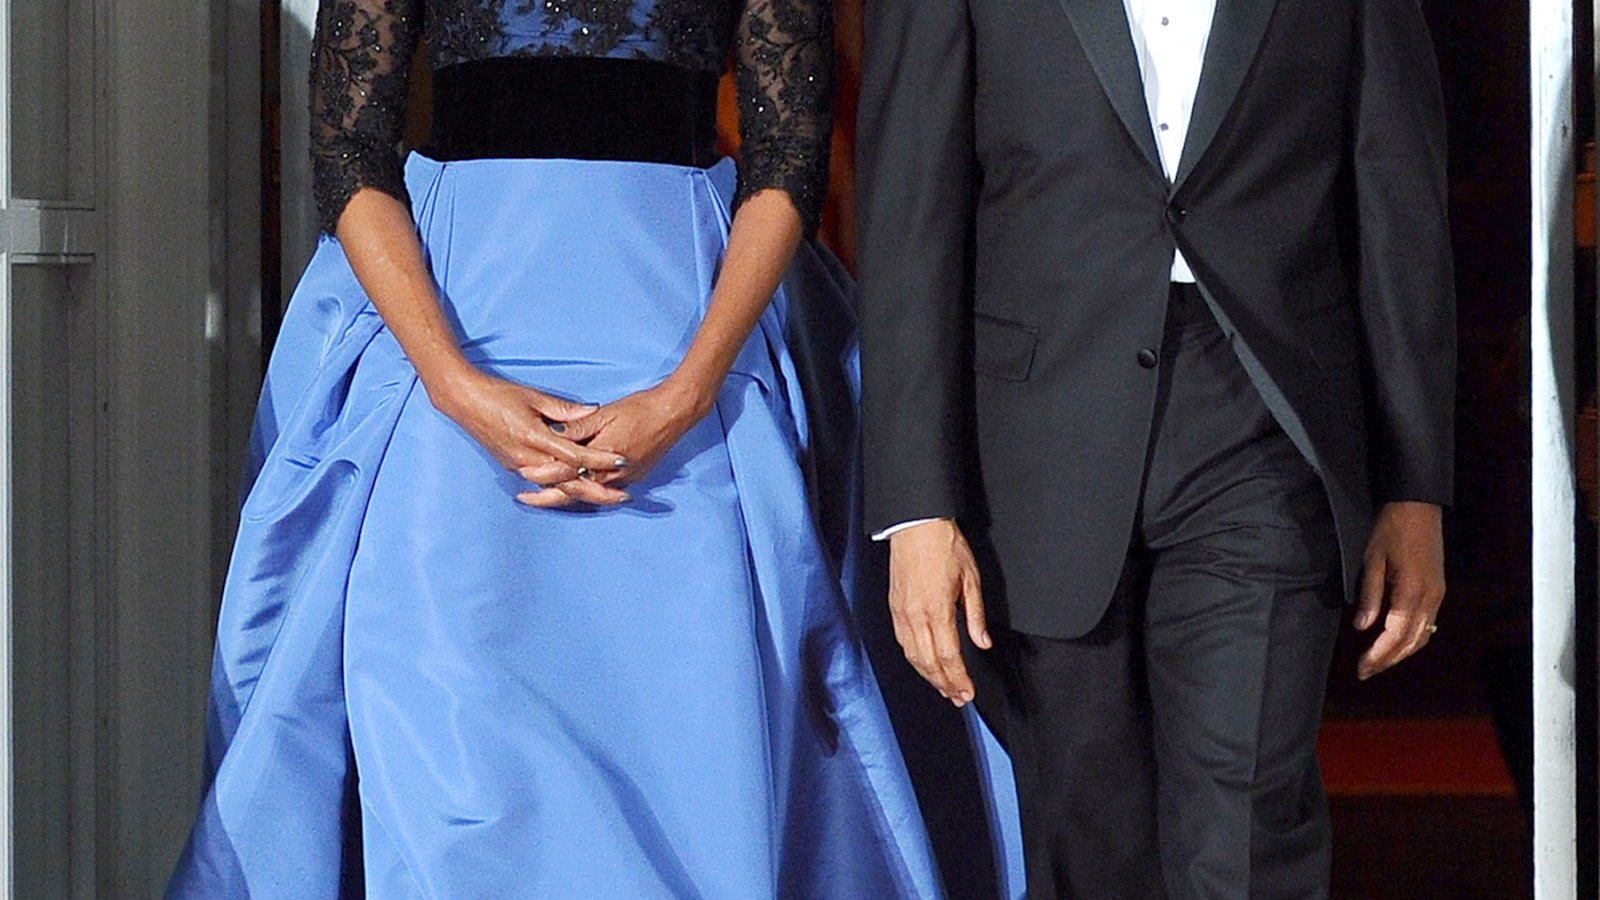 Michelle and Barack Obama at the State Dinner on Feb. 11, 2014